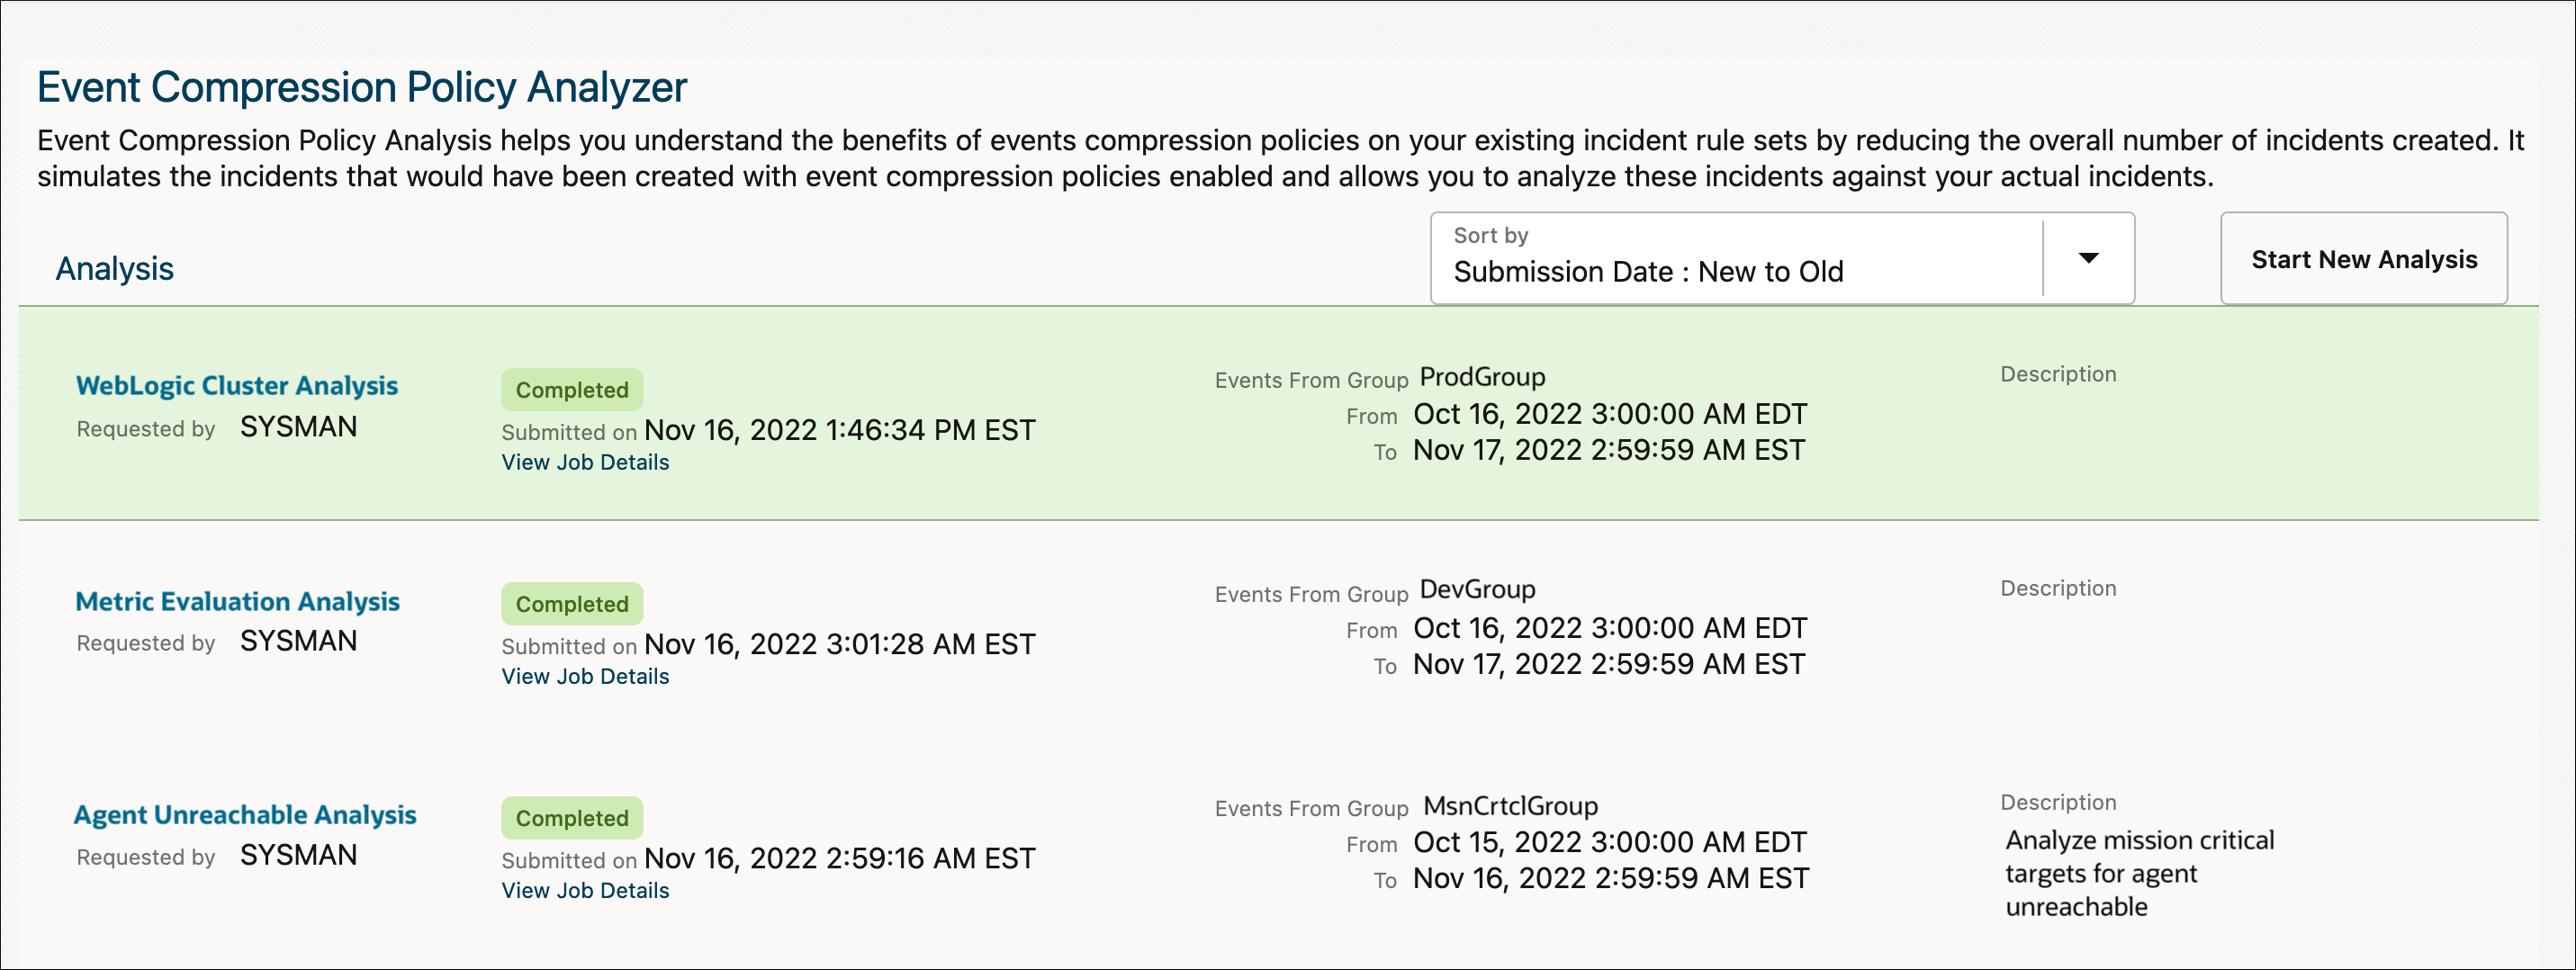 Image shows the Event Compression Analyzer page.